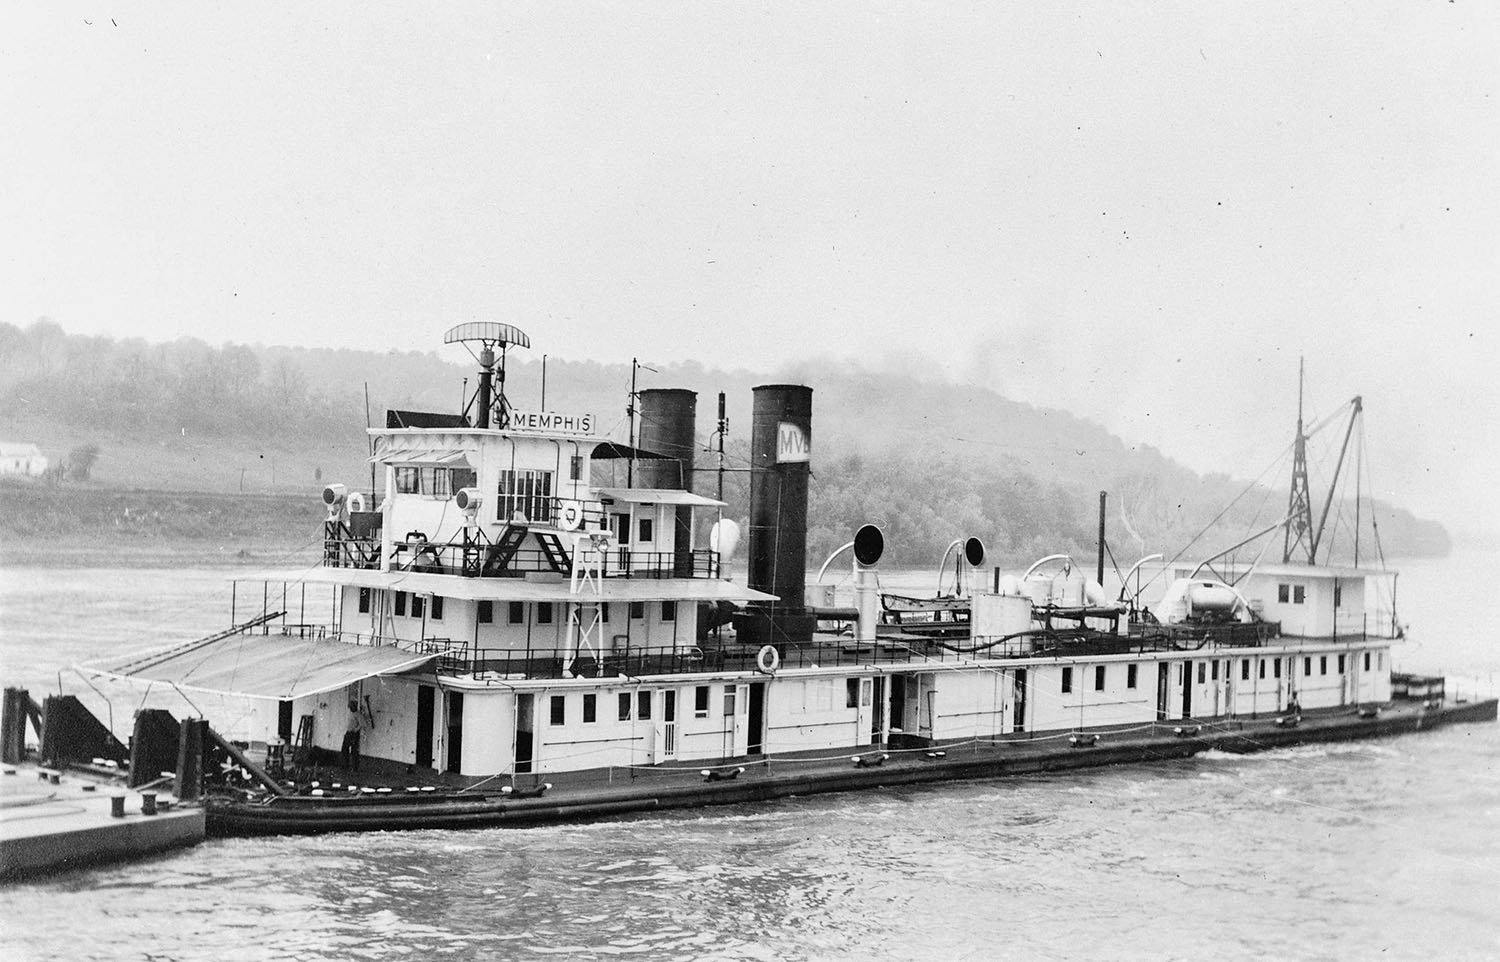 The Memphis while under charter to the Valley Line. (Dan Owen Boat Photo Museum collection)